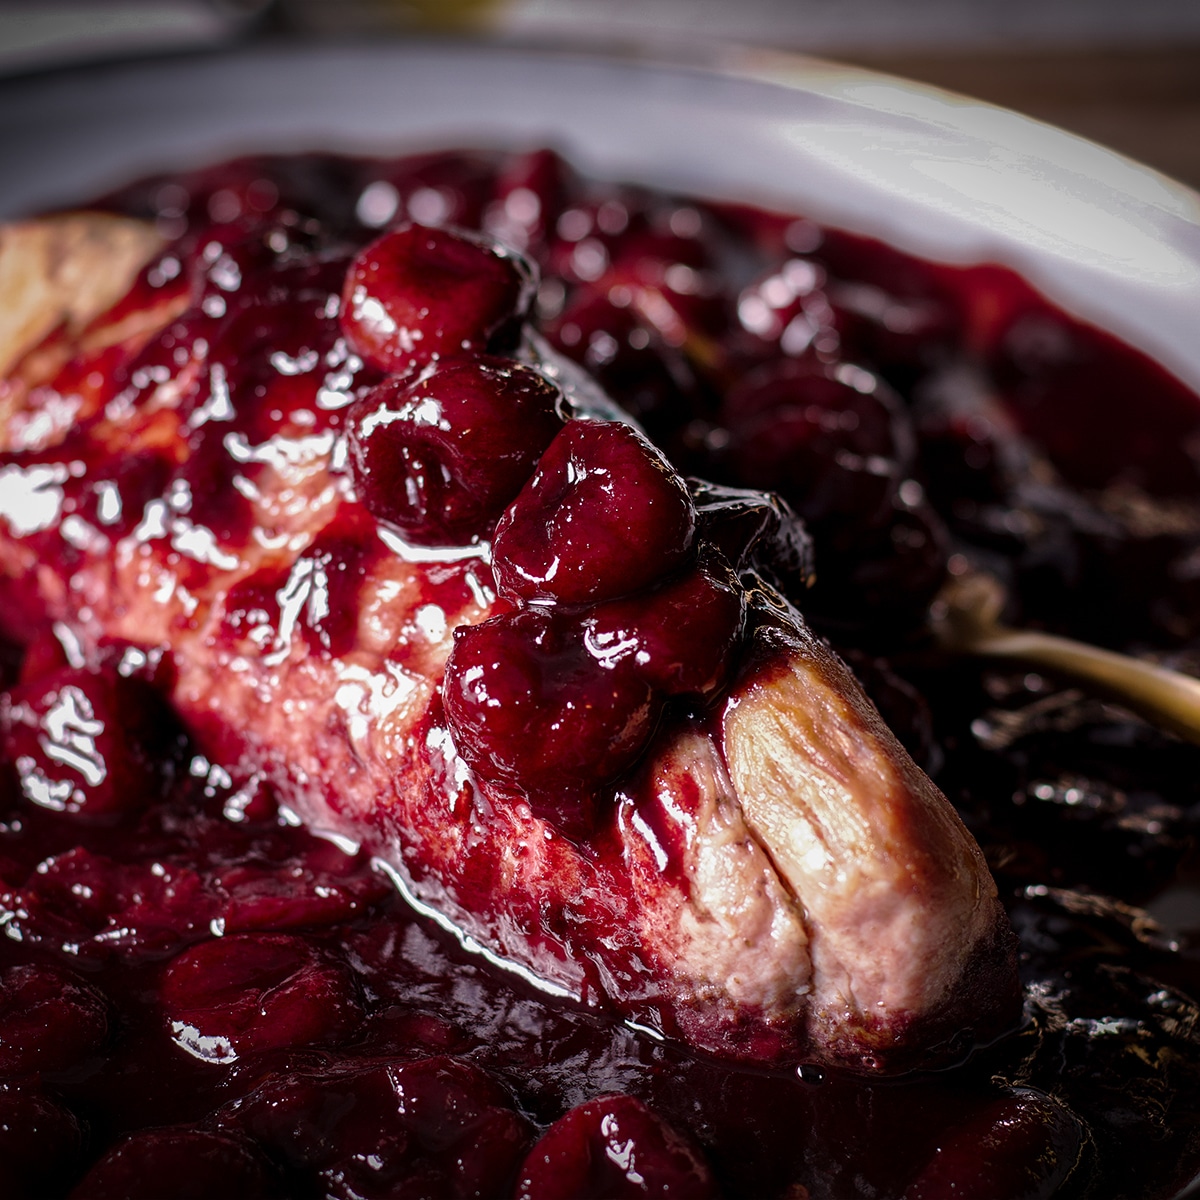 A roasted pork tenderloin on a serving platter smothered with red wine cherry sauce.